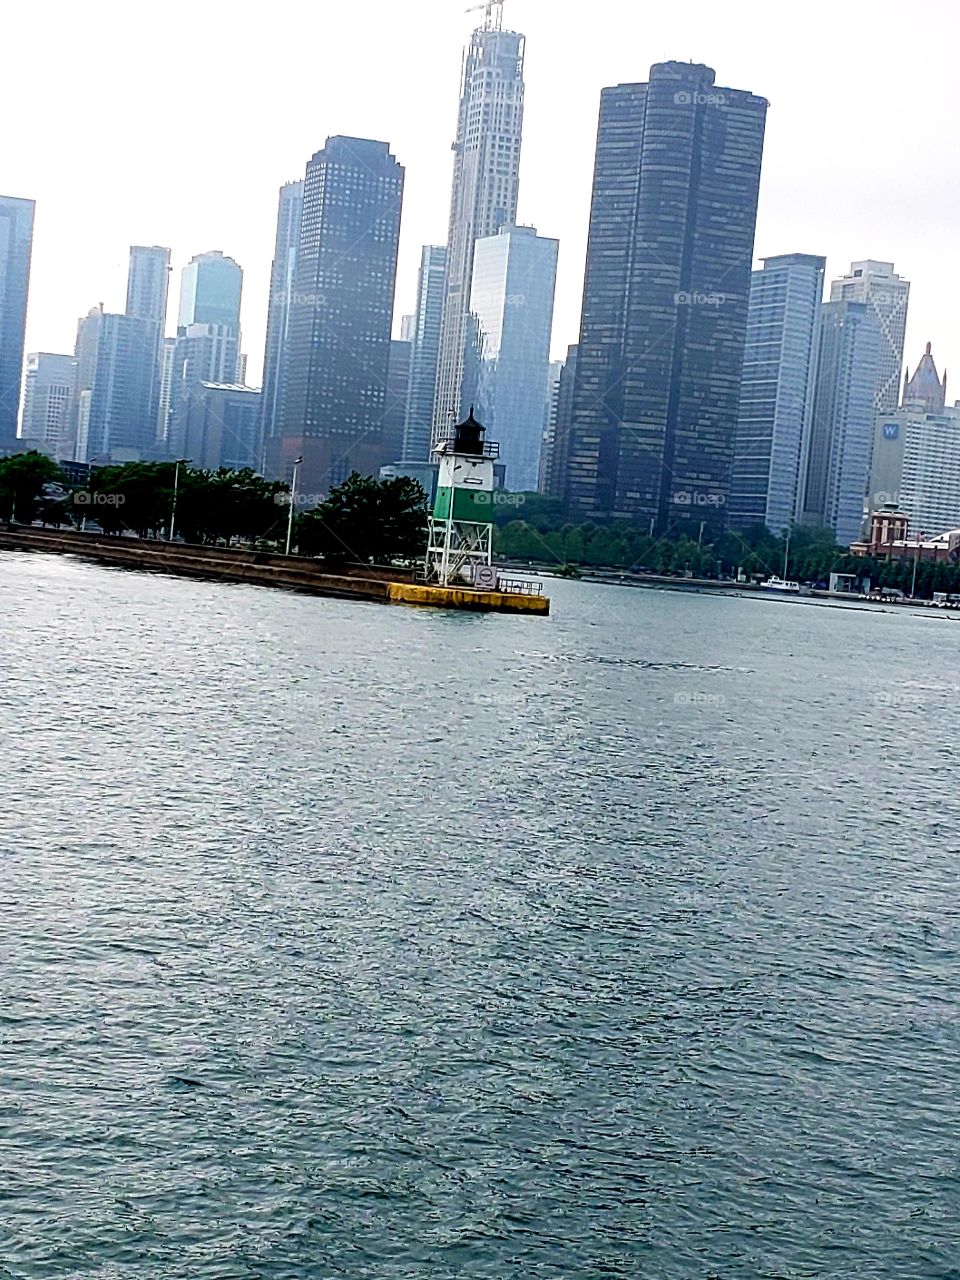 View of foggy downtown Chicago from Lake Michigan and a small lighthouse